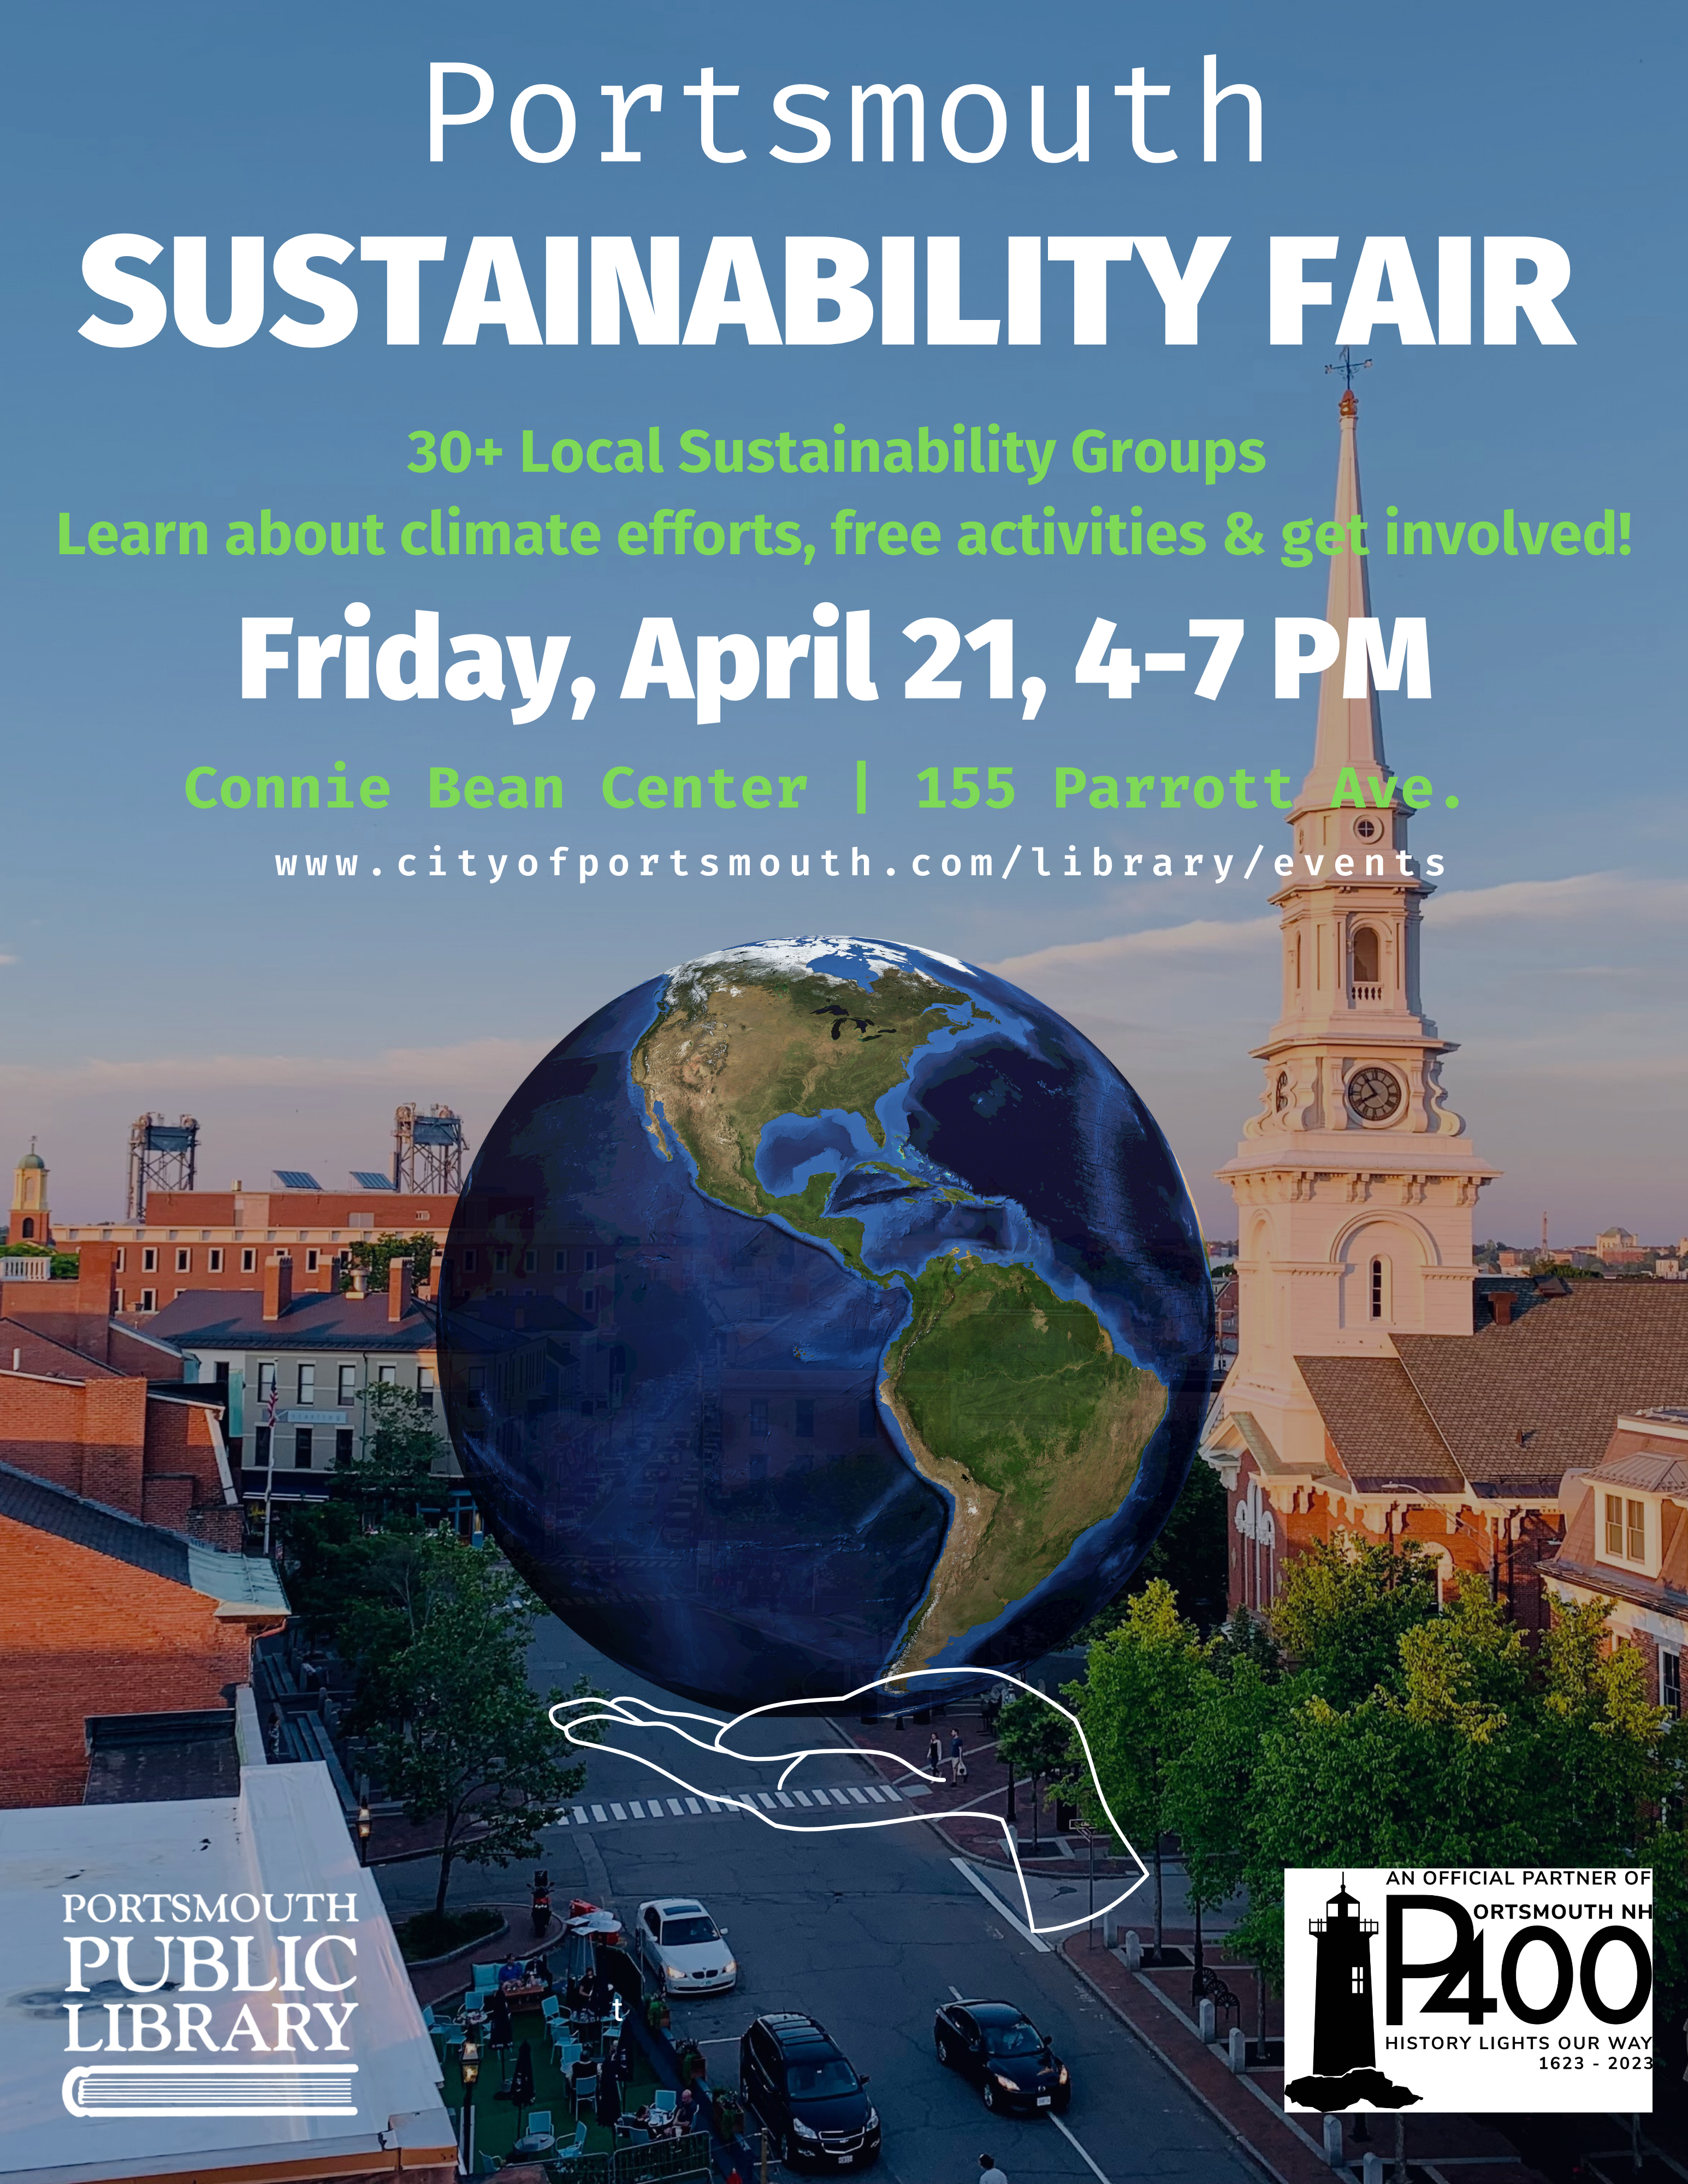 Portsmouth Sustainability Fair Friday April 21 4-7 Connie Bean Center 30 sustainability organizations activities 